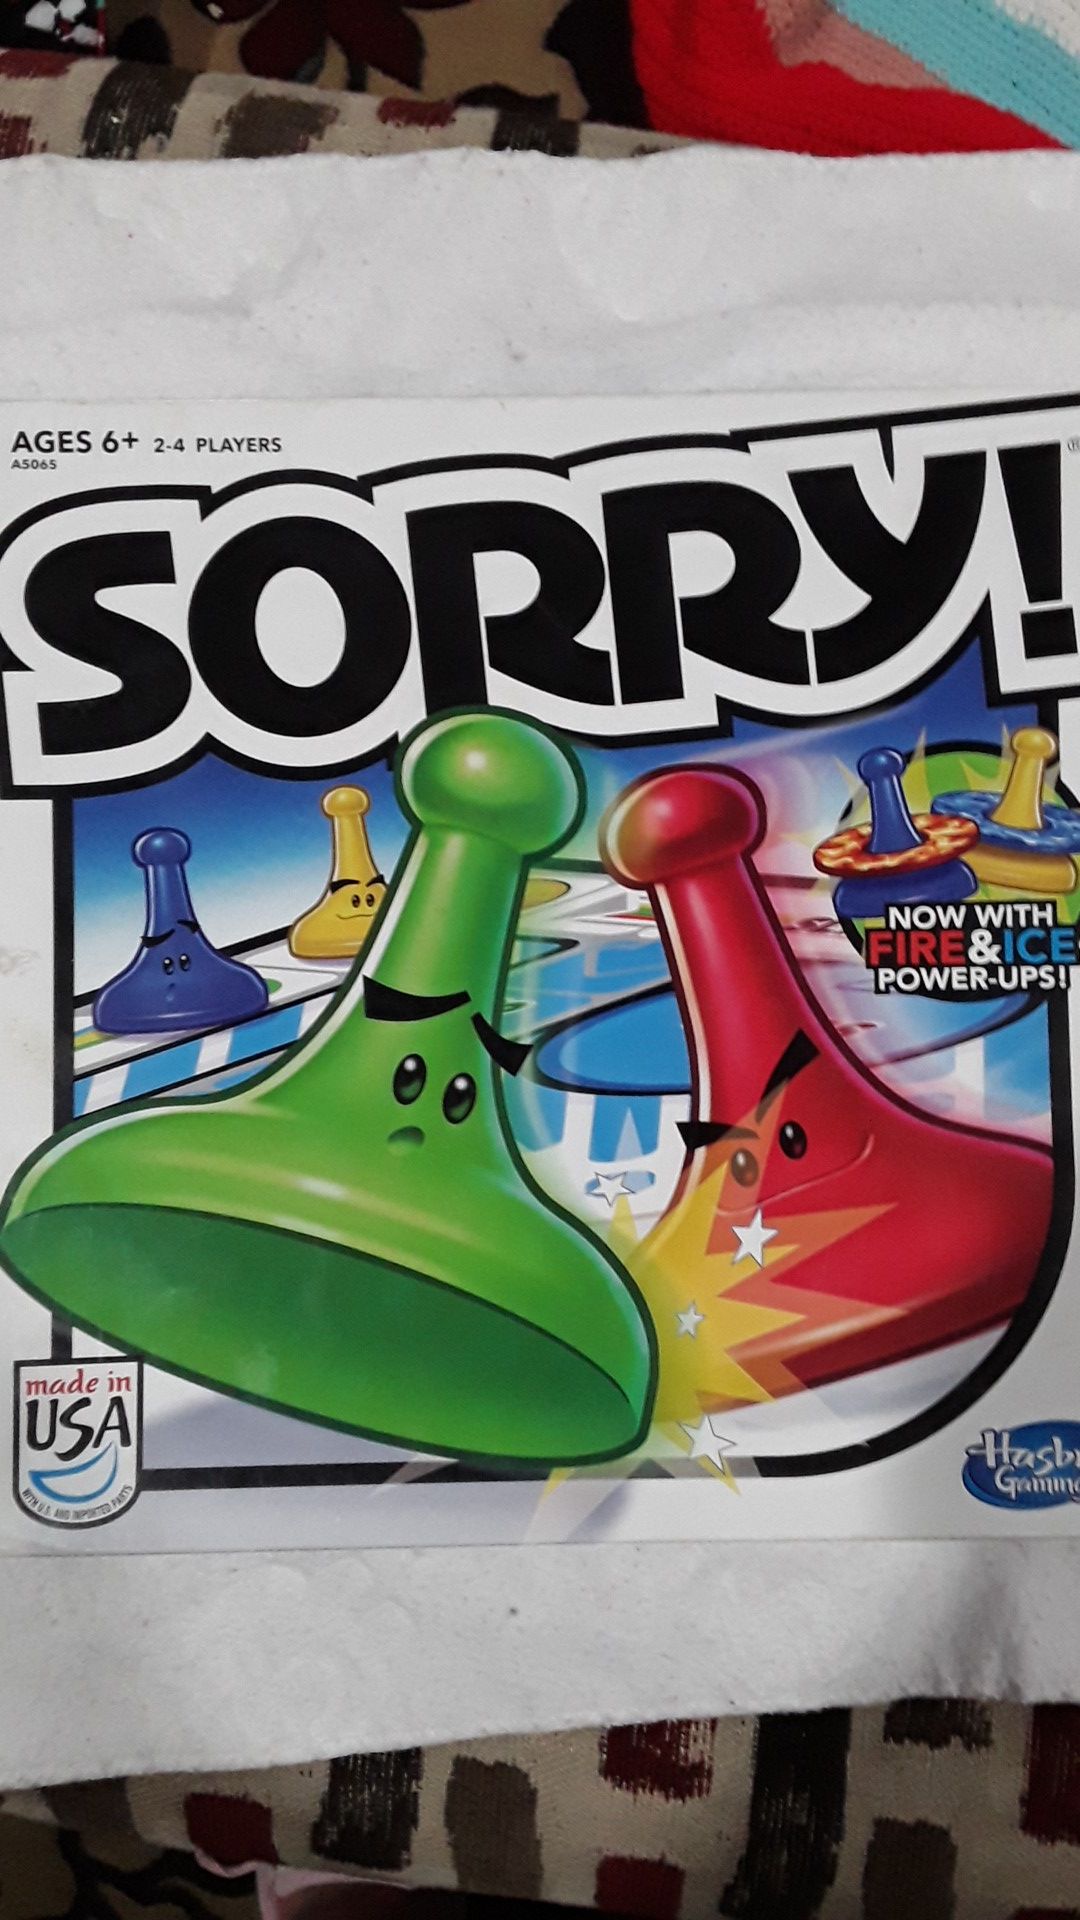 Sorry the board game